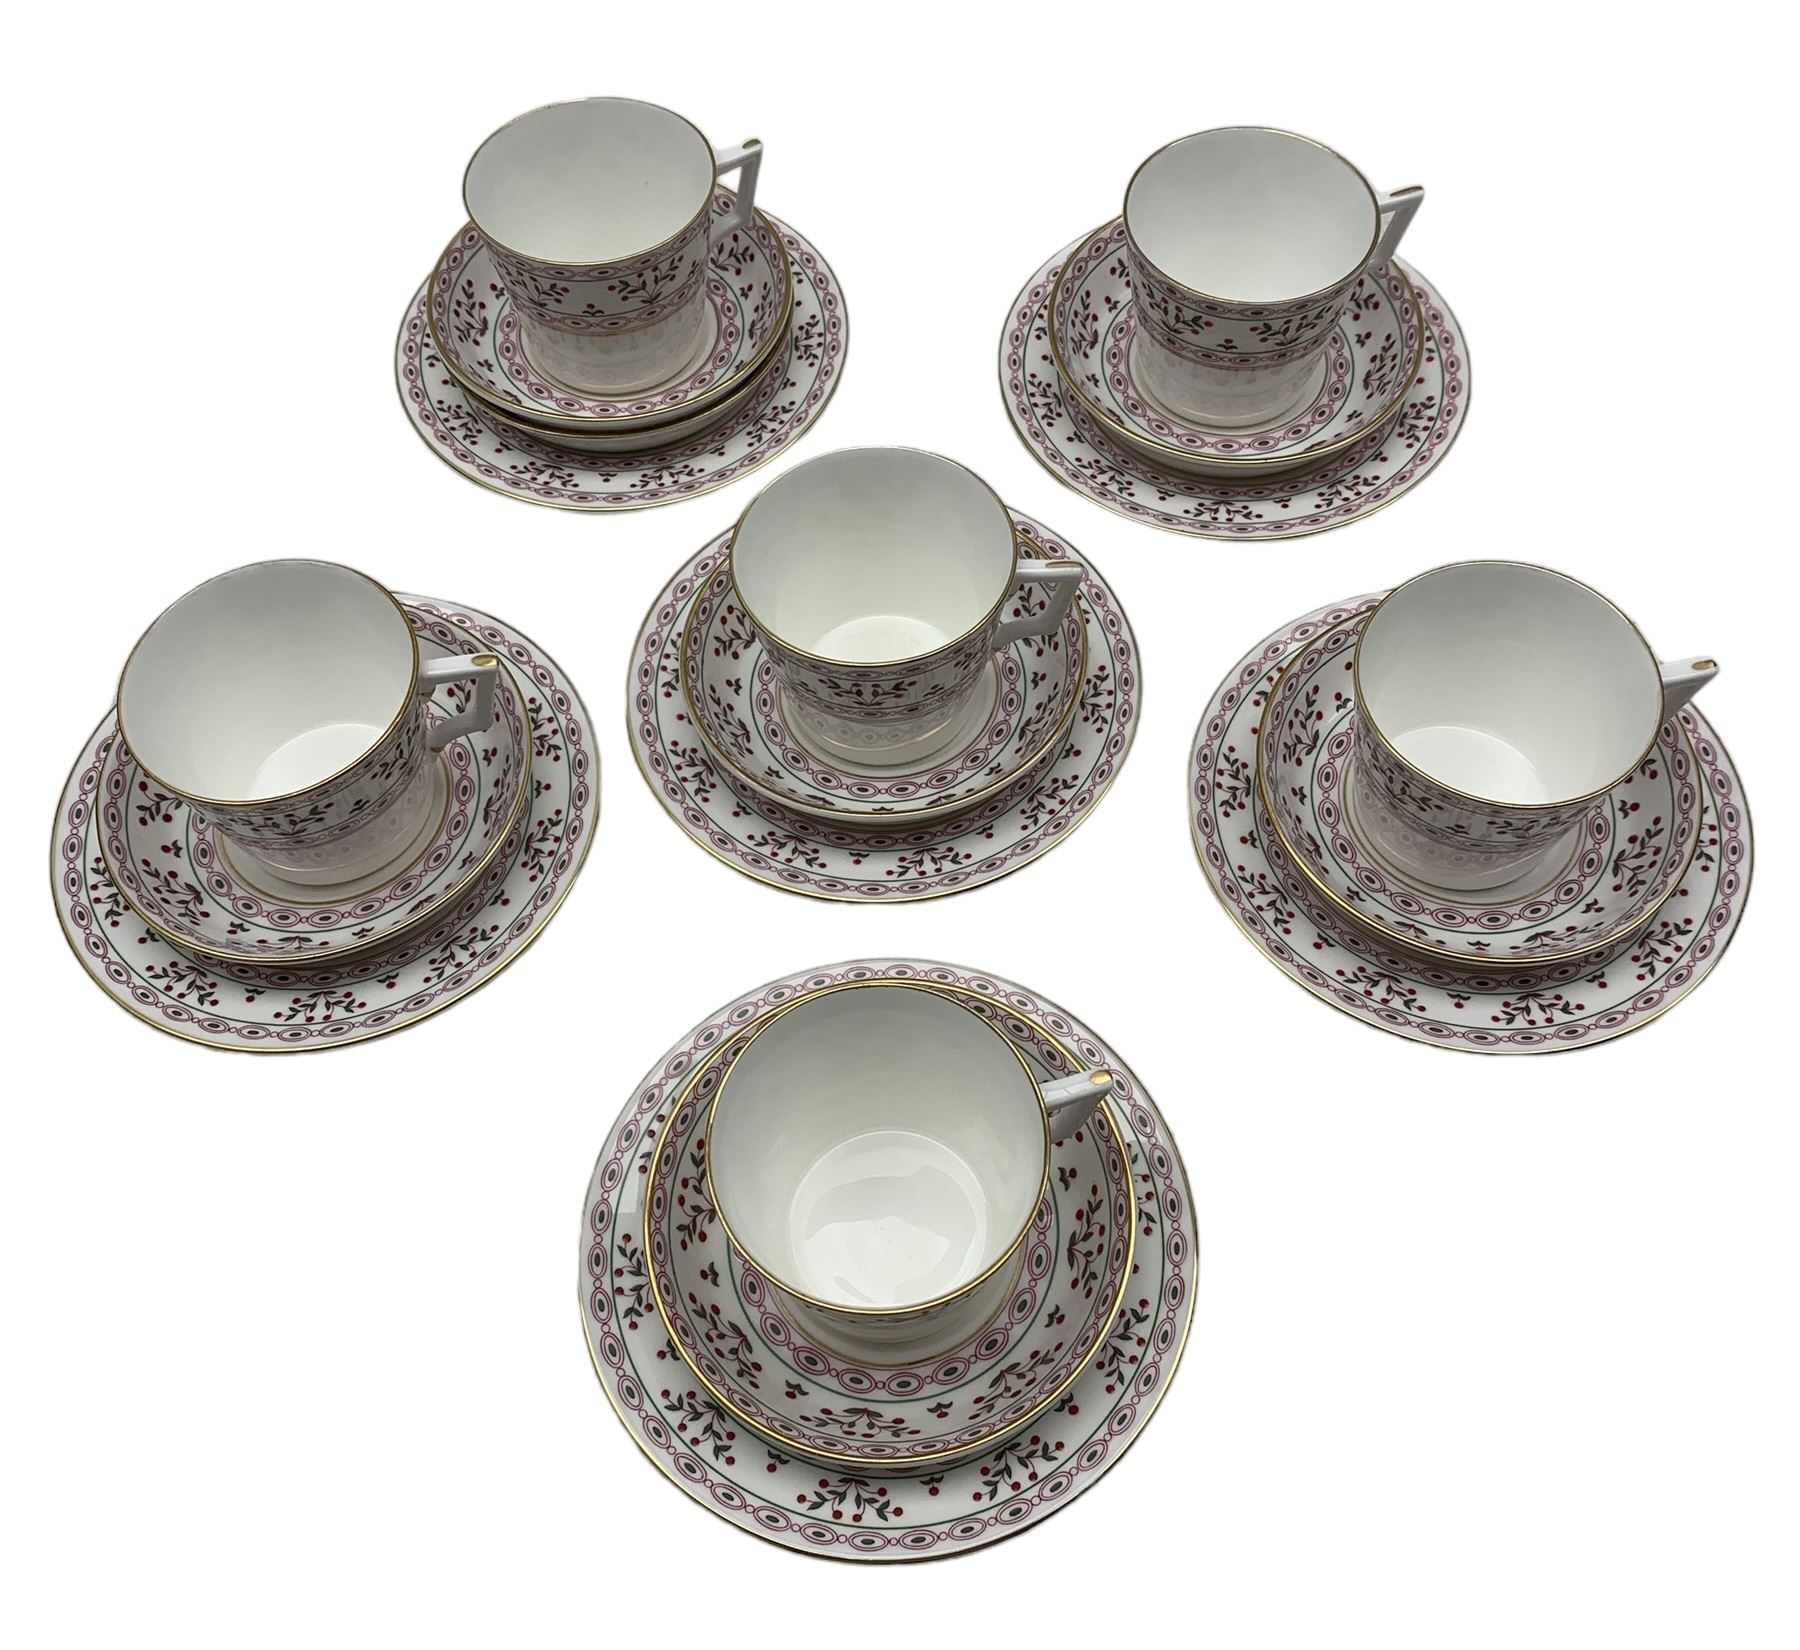 Royal Crown Derby Brittany pattern tea wares comprising six teacups